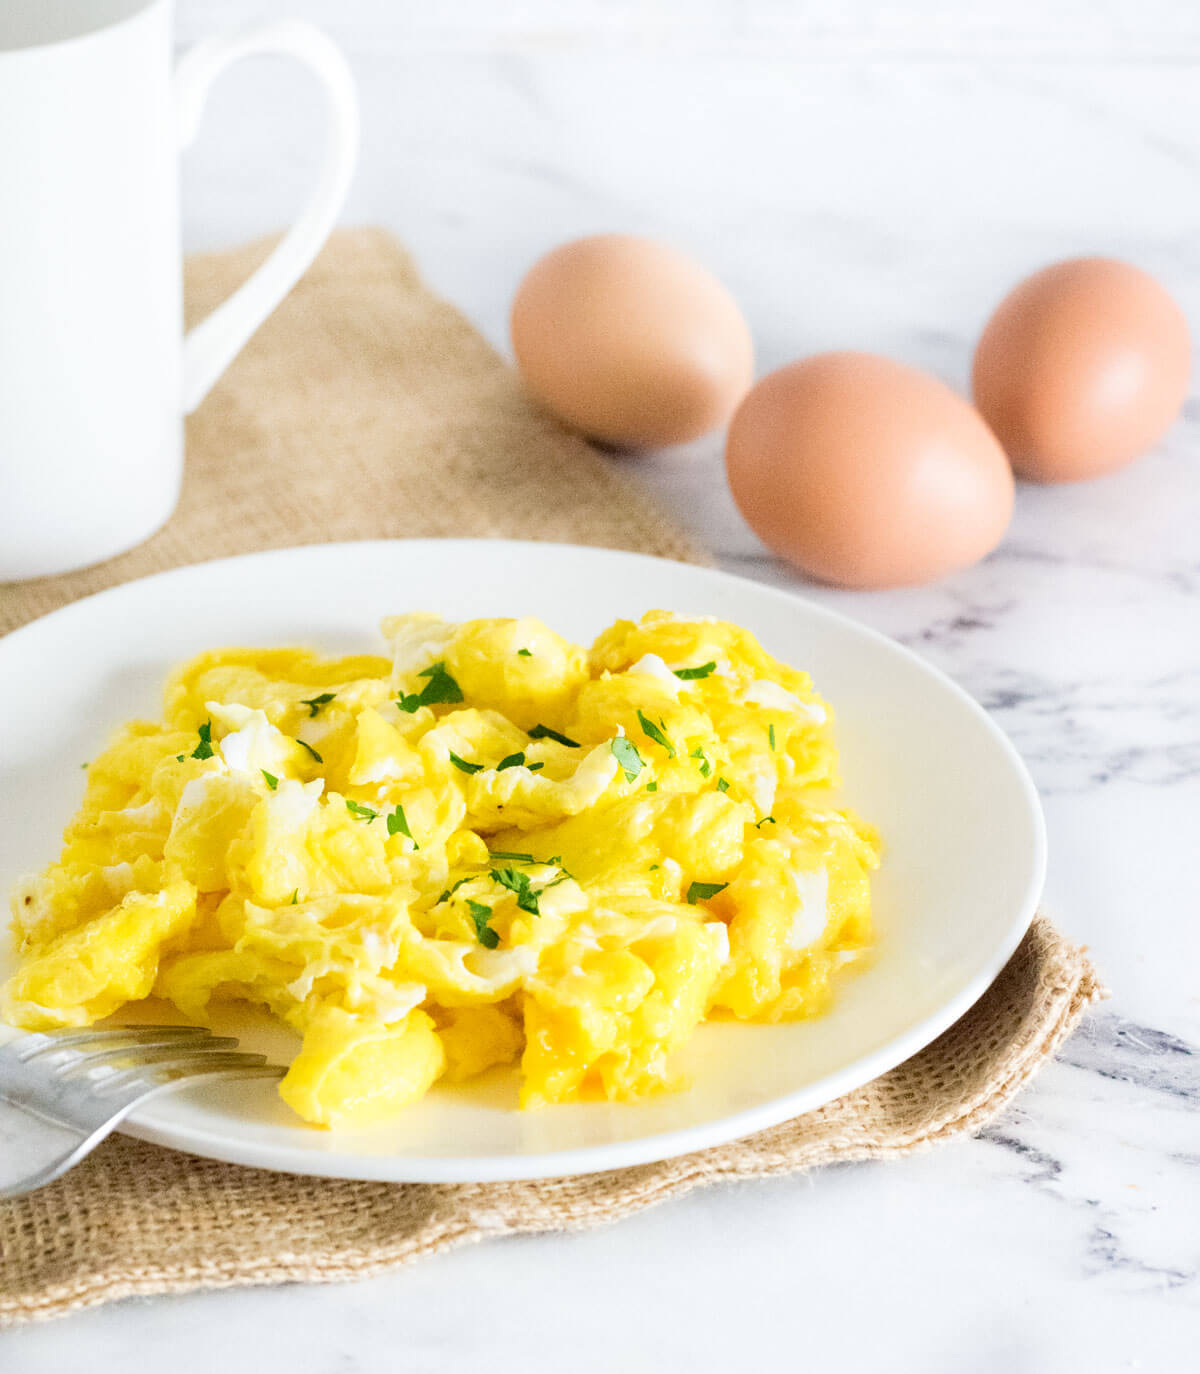 Scrambled eggs without milk.